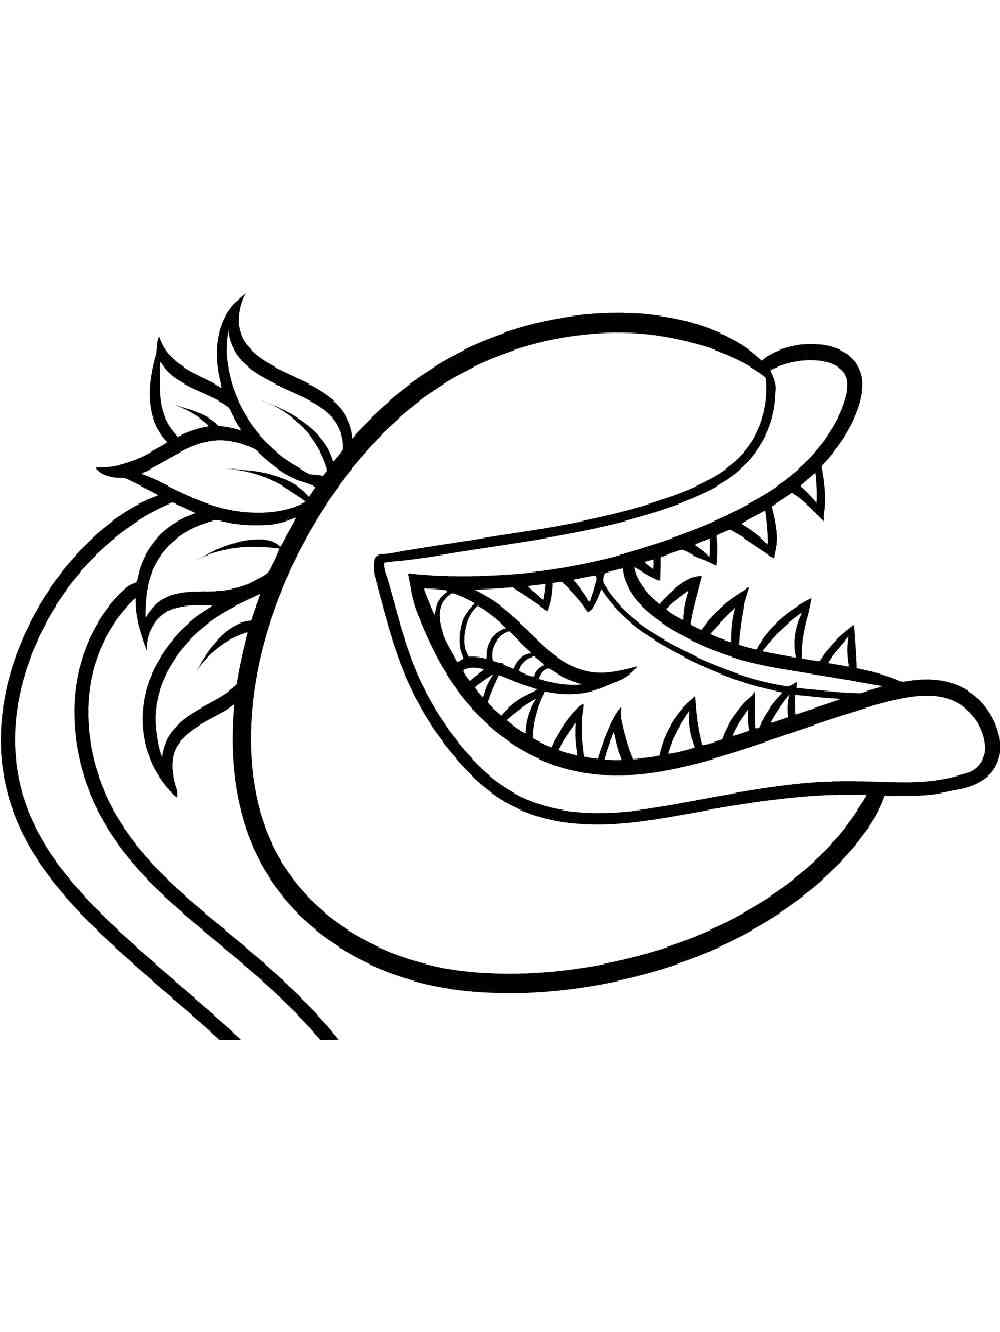 Chomper from PVZ coloring page